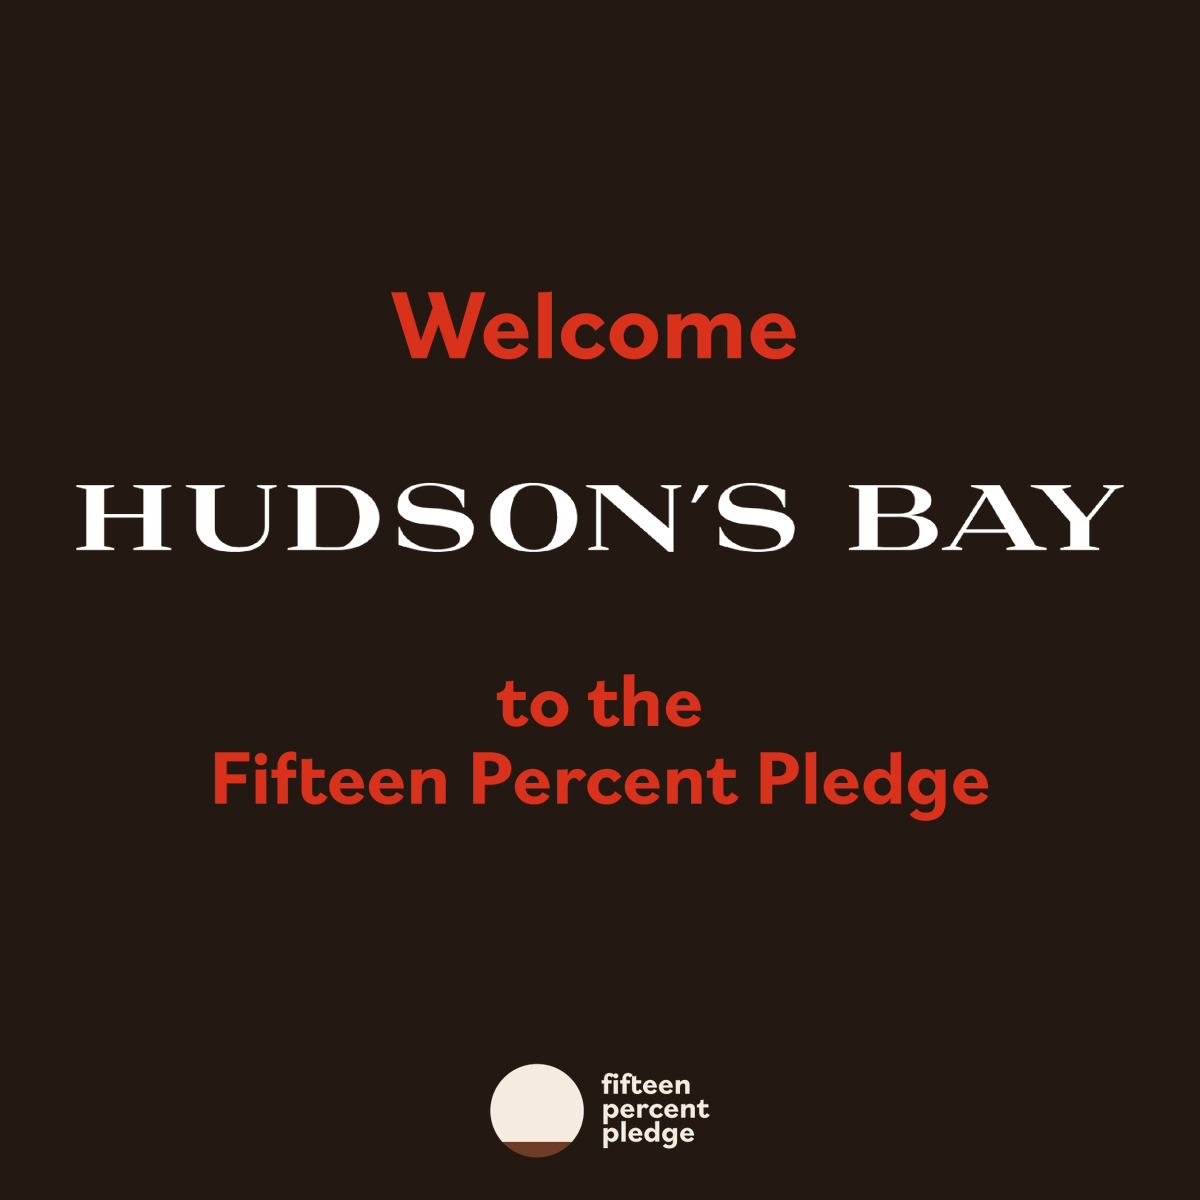 Canadian friends! Please join us is welcoming @hudsonsbay to the #15PercentPledge. Thank you Hudson's Bay for leading the way in Canada as the first department store to take the Pledge. Read more about their commitment here > tinyurl.com/7wjpxc